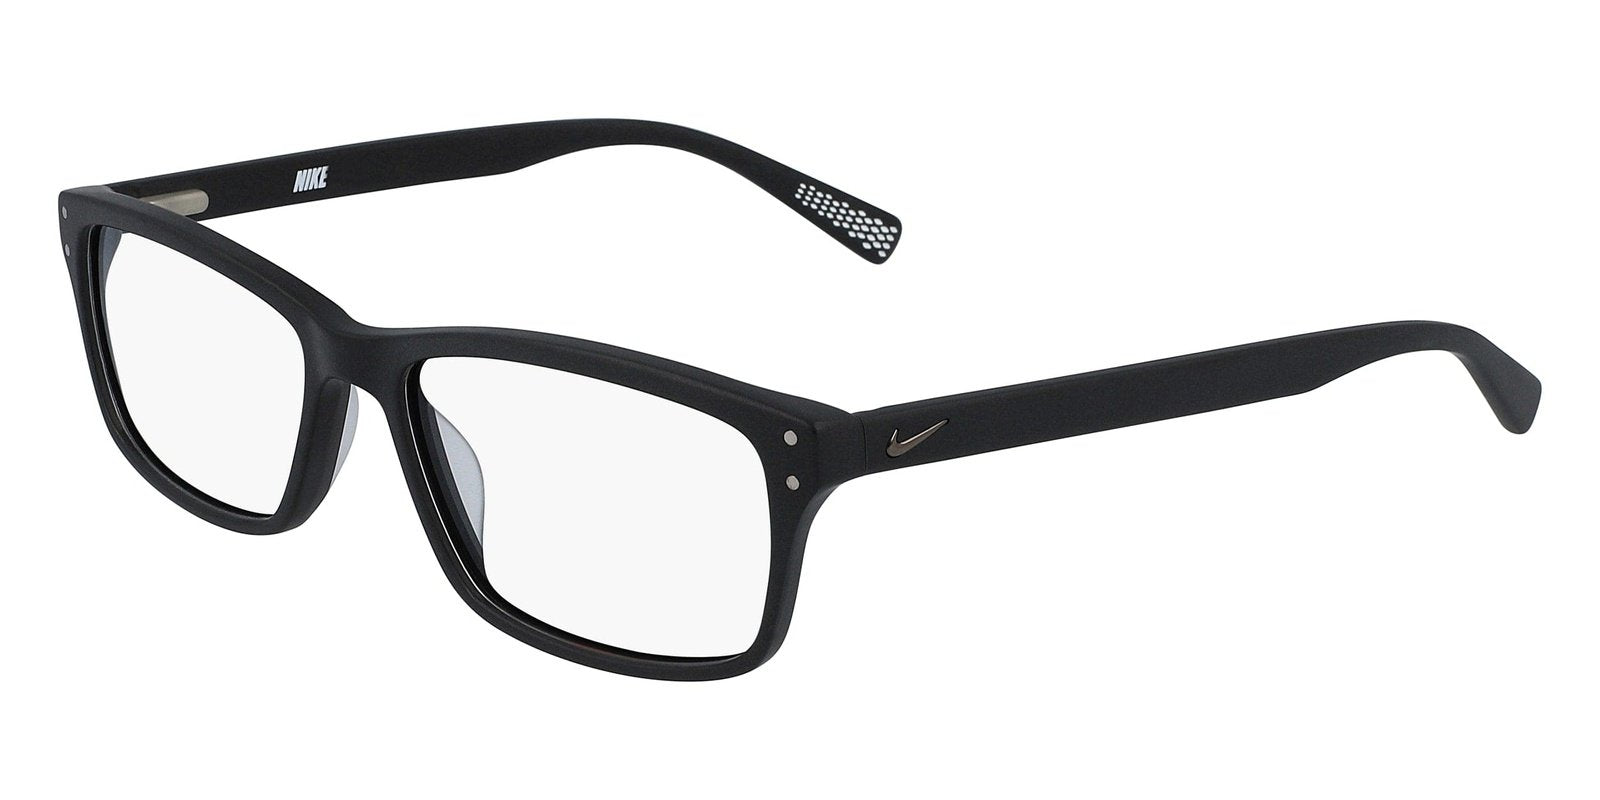  Nike 7245 Black (003) | Spectacle Clinic